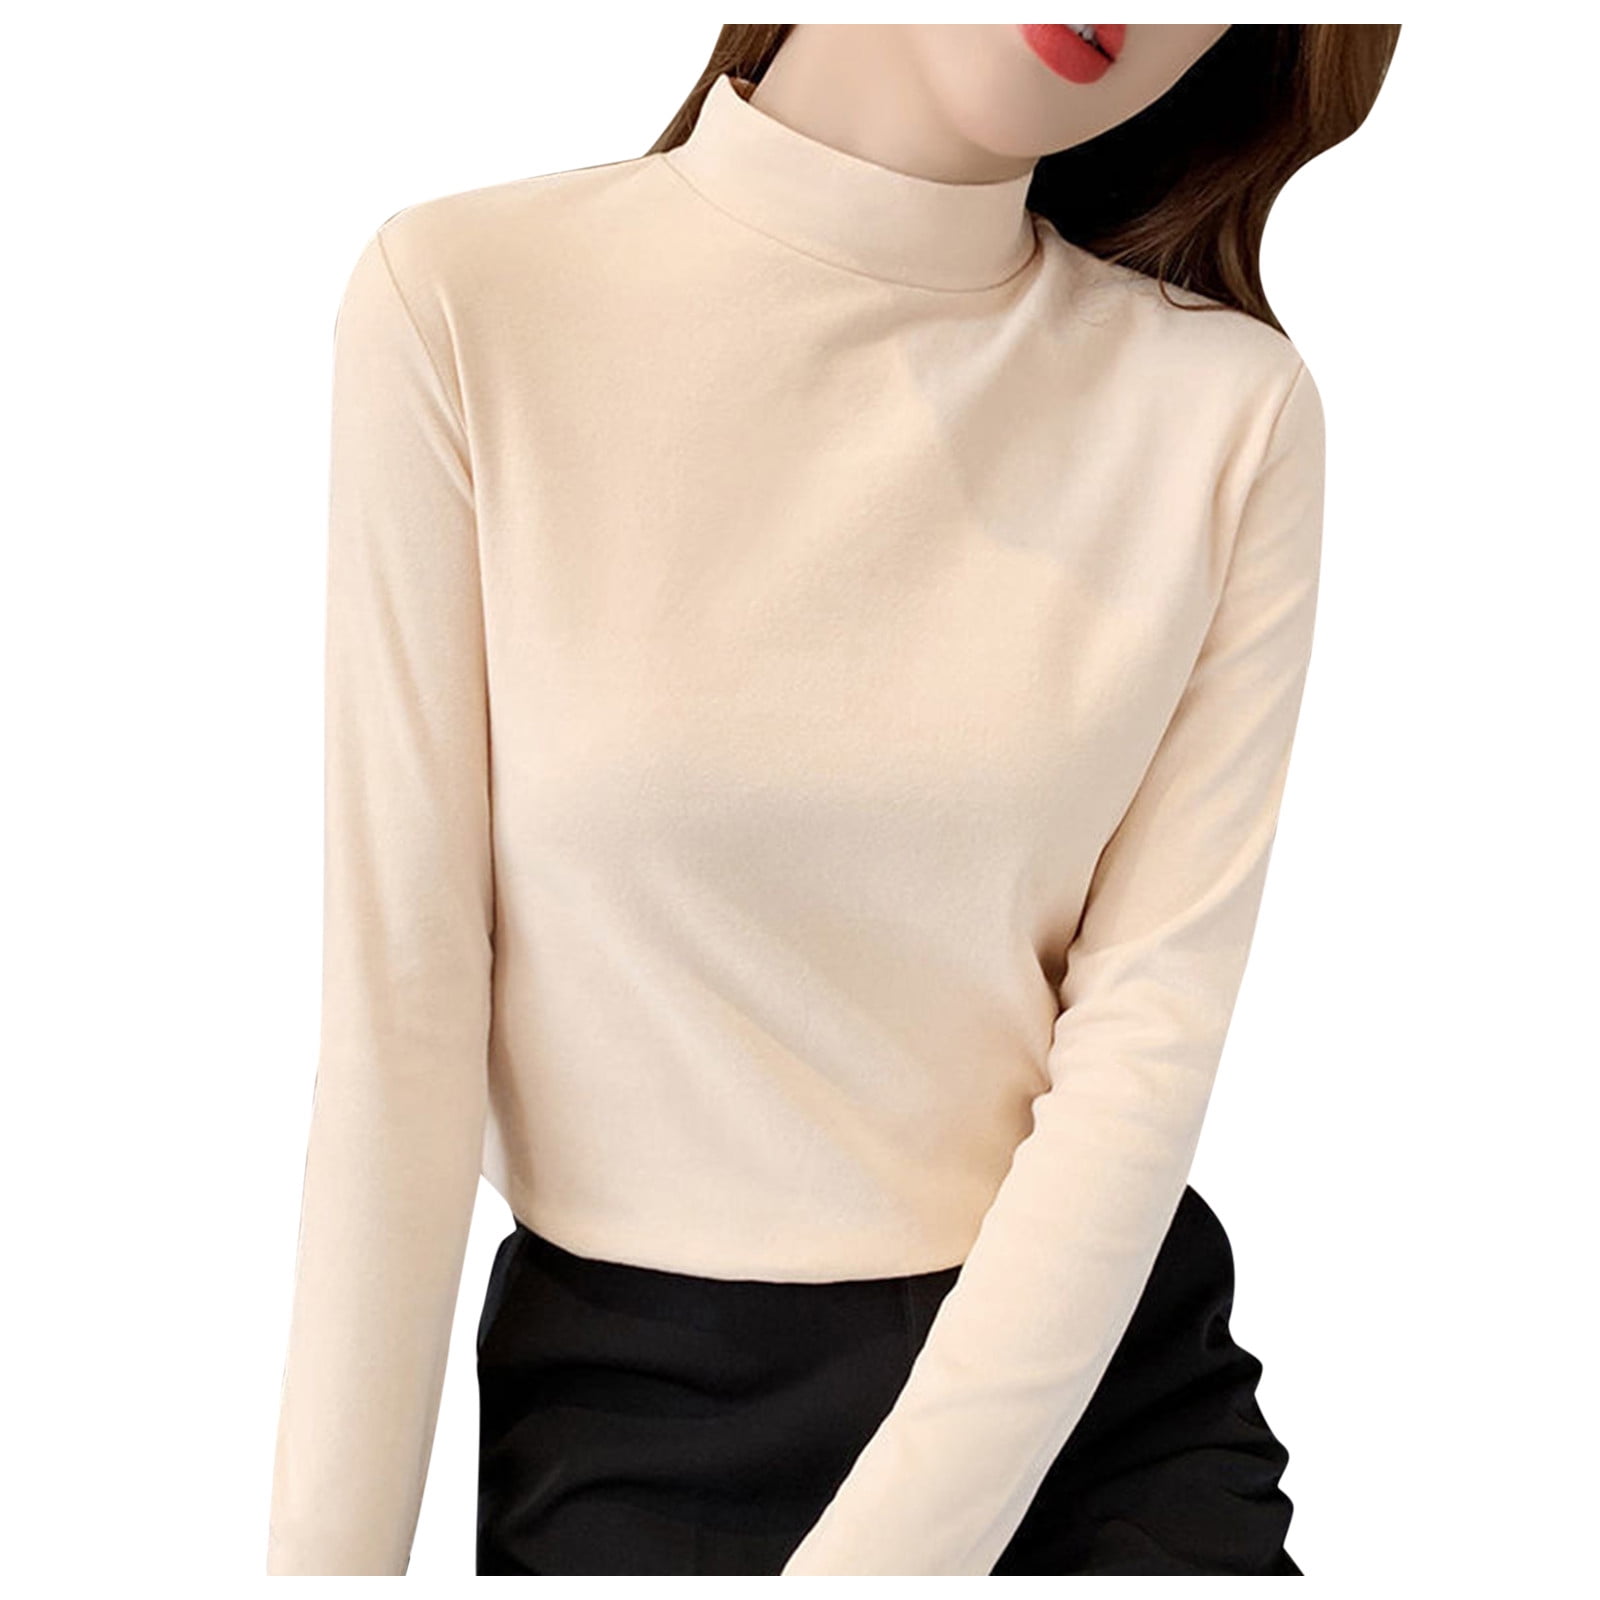 mnjin women shirts and blouses women slim casual solid long sleeve  turtleneck blouse tops slim fit stretchy layer tee shirts t shirt for women  beige